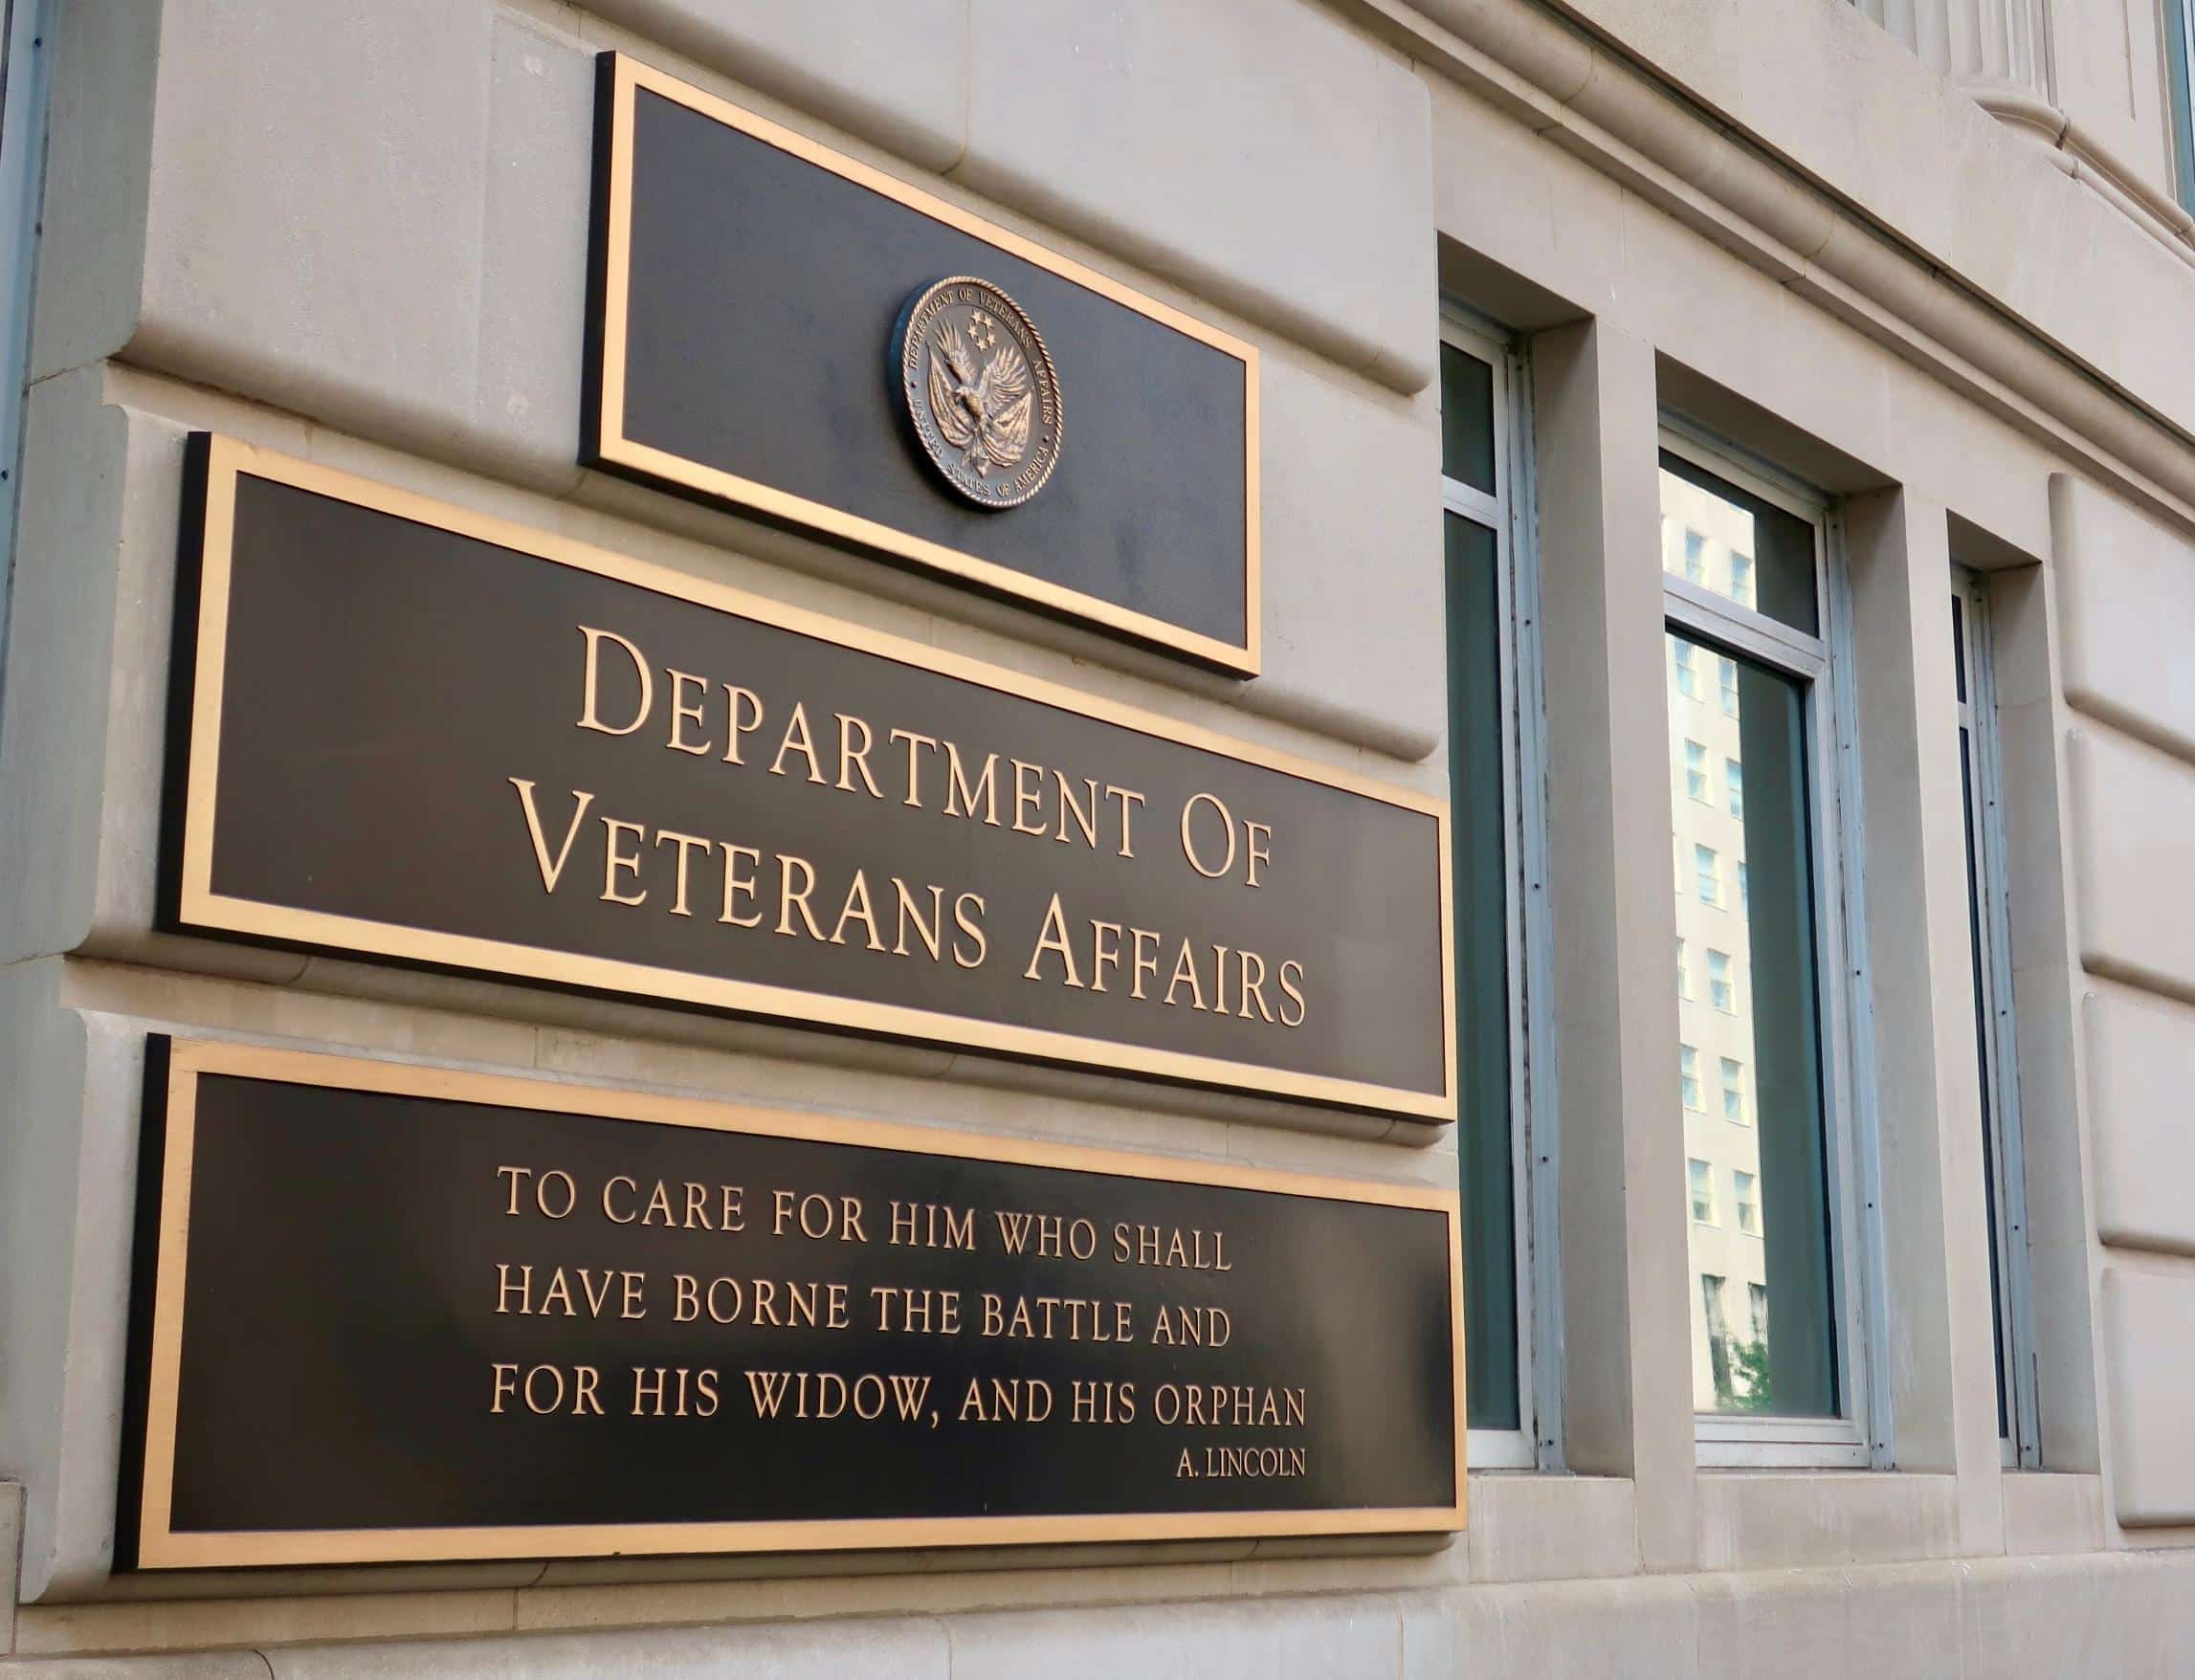 WASHINGTON - SEPTEMBER 18, 2020: SIGN at US DEPARTMENT OF VETERANS AFFAIRS headquarters building with quotation from Lincoln